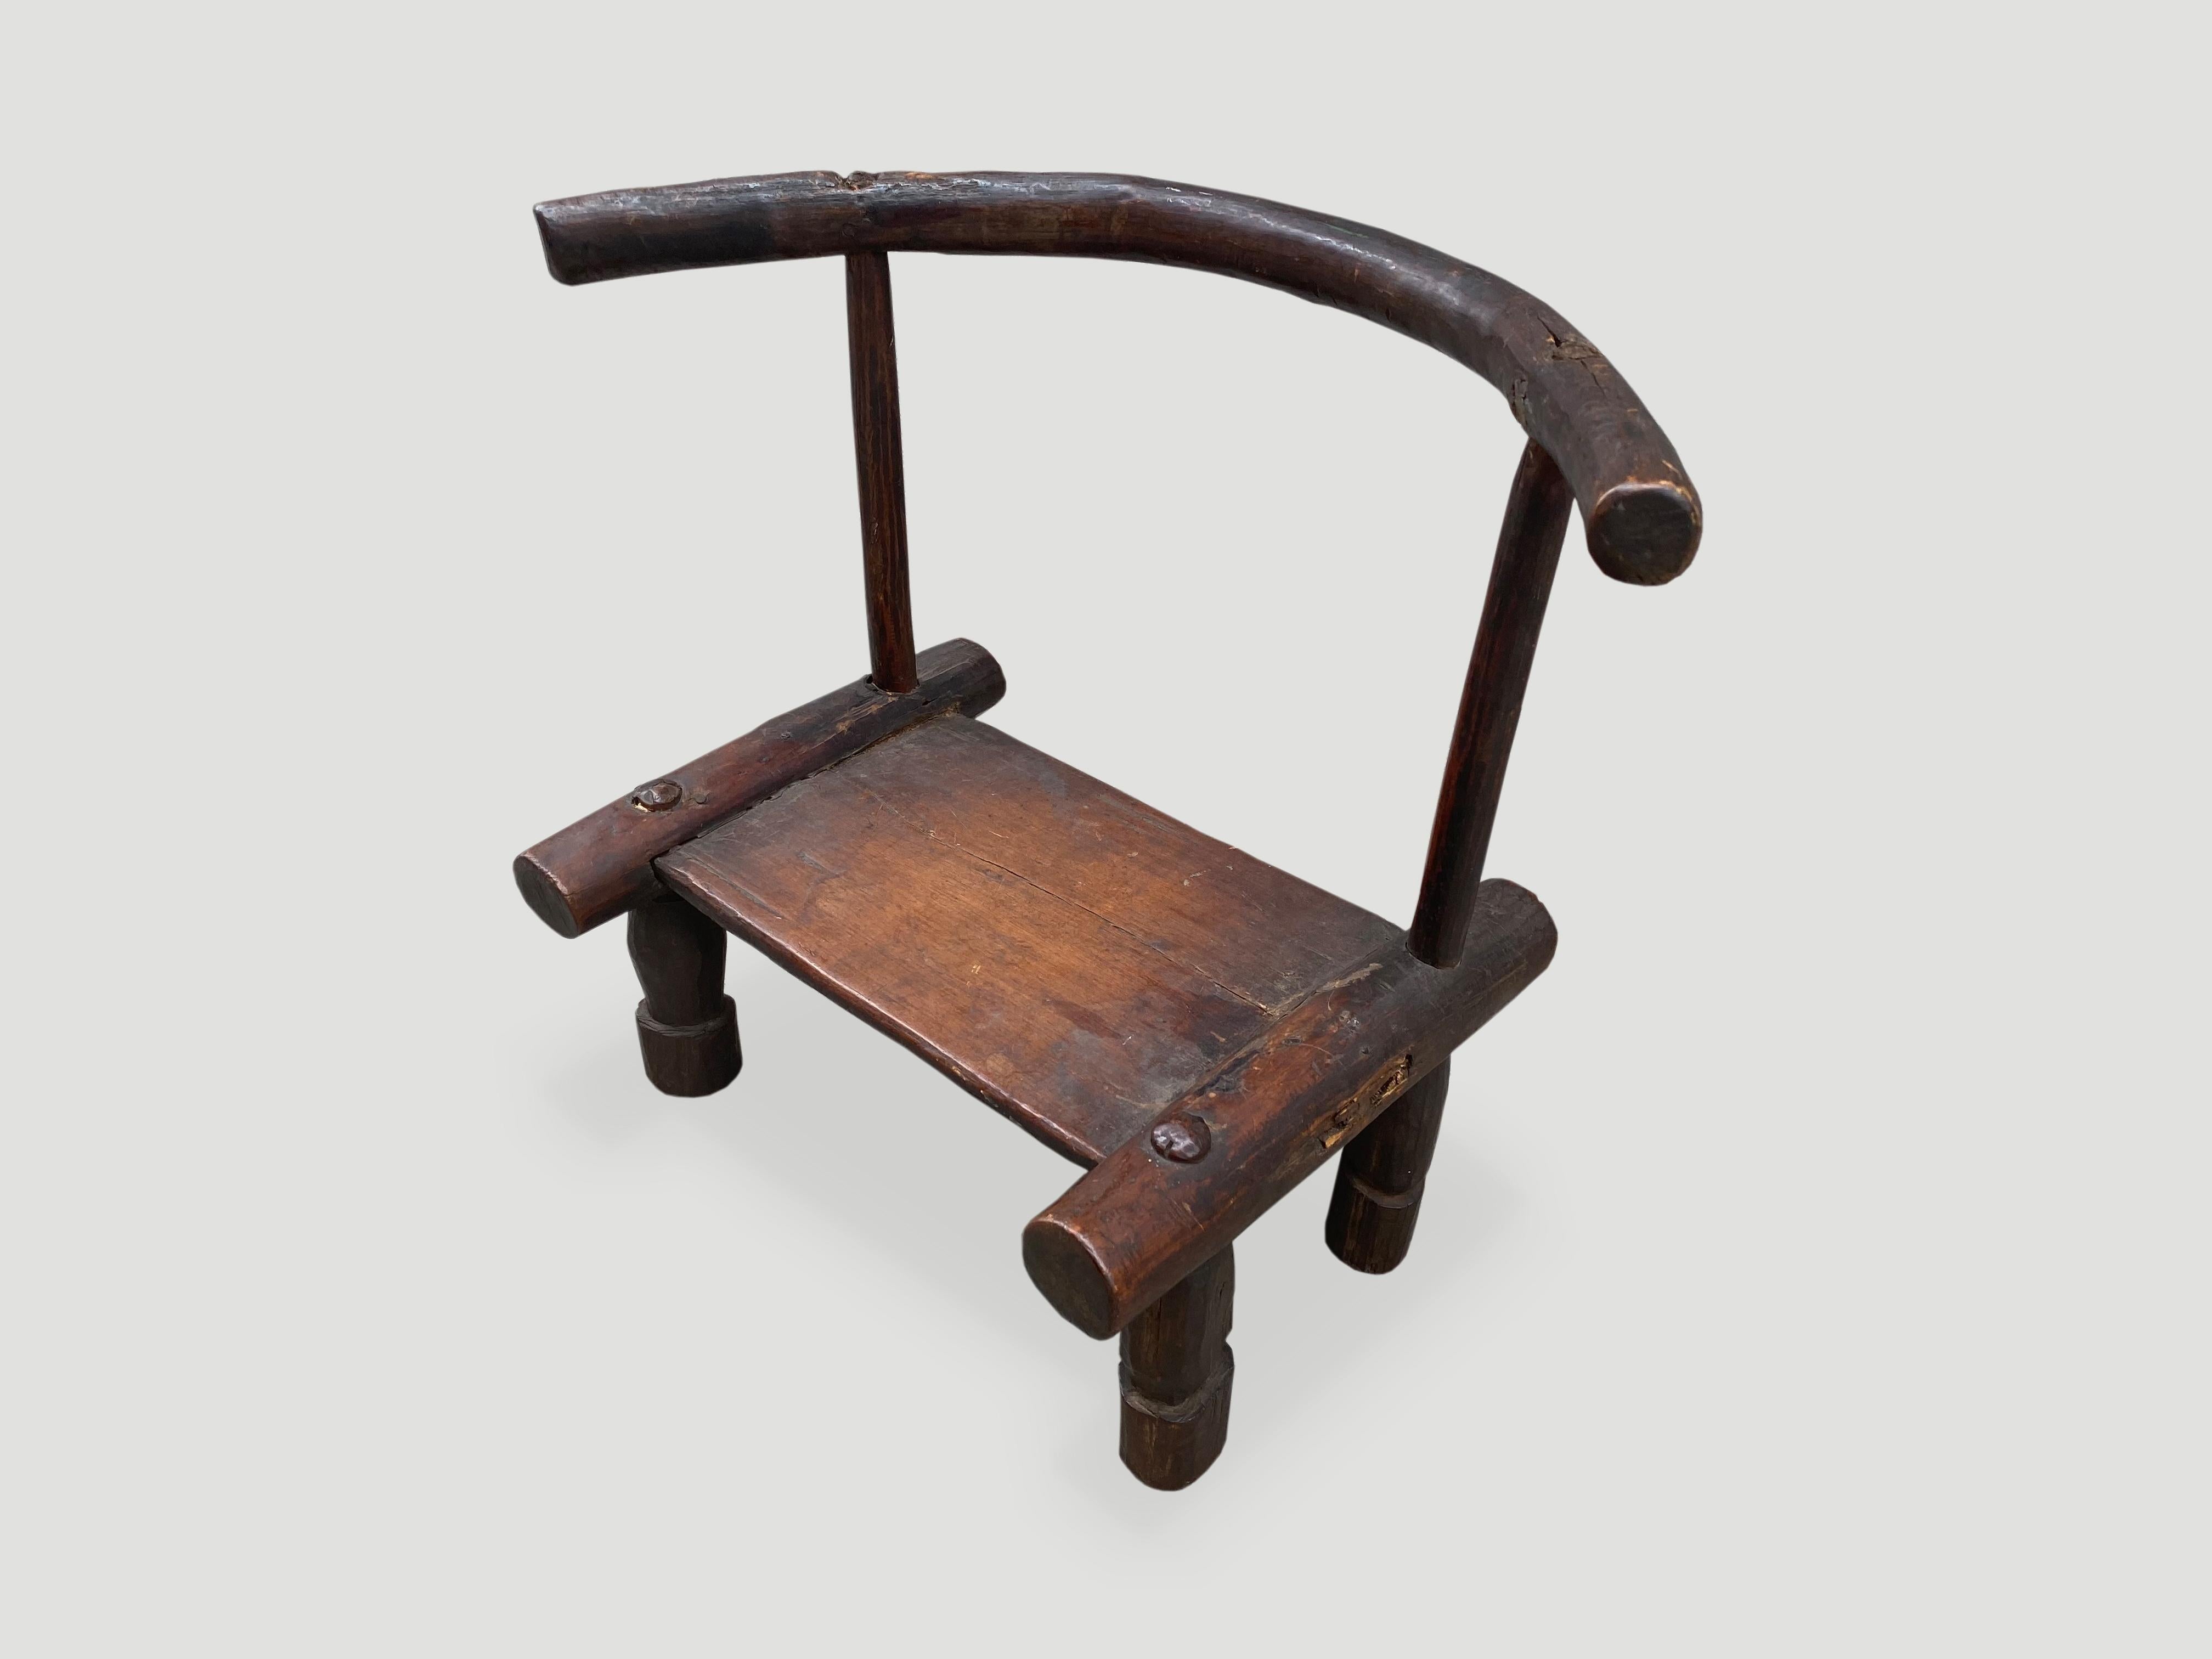 Beautiful patina on this 19th century hand carved wooden chair from the Ivory Coast of Africa. This can also be used as a low side table. A piece of art. We only source the best.

This chair was sourced in the spirit of wabi-sabi, a Japanese